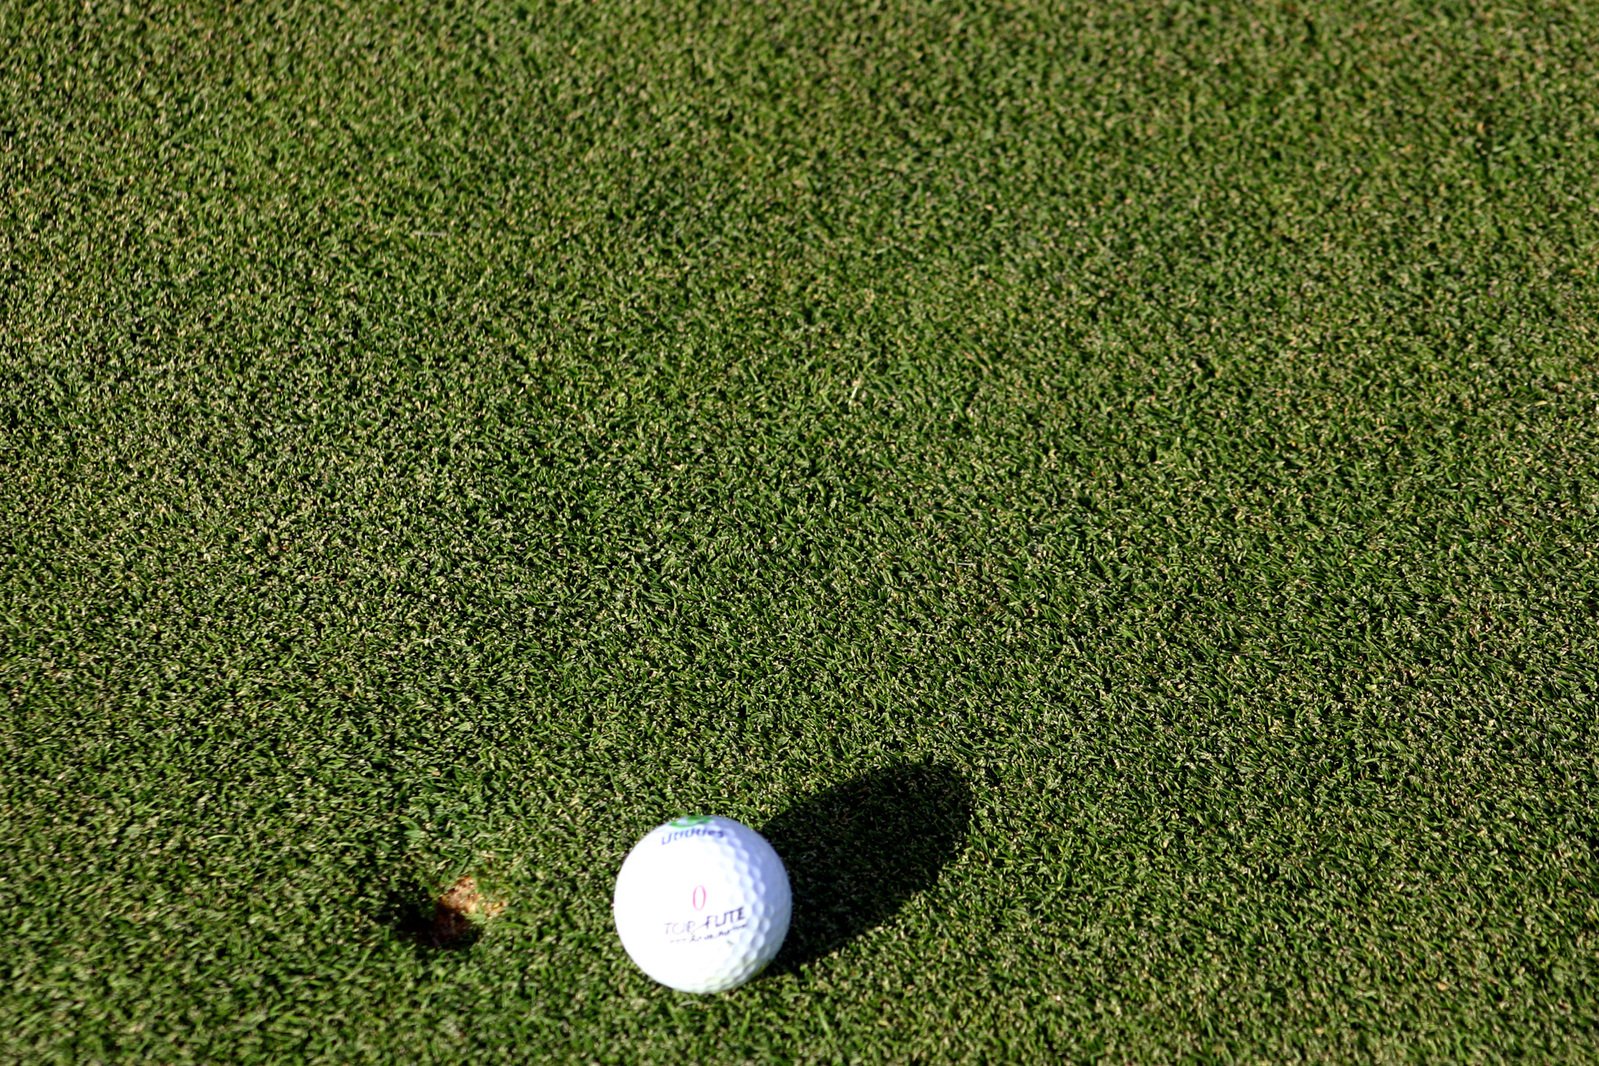 the view from above of a golf ball and tee in the grass